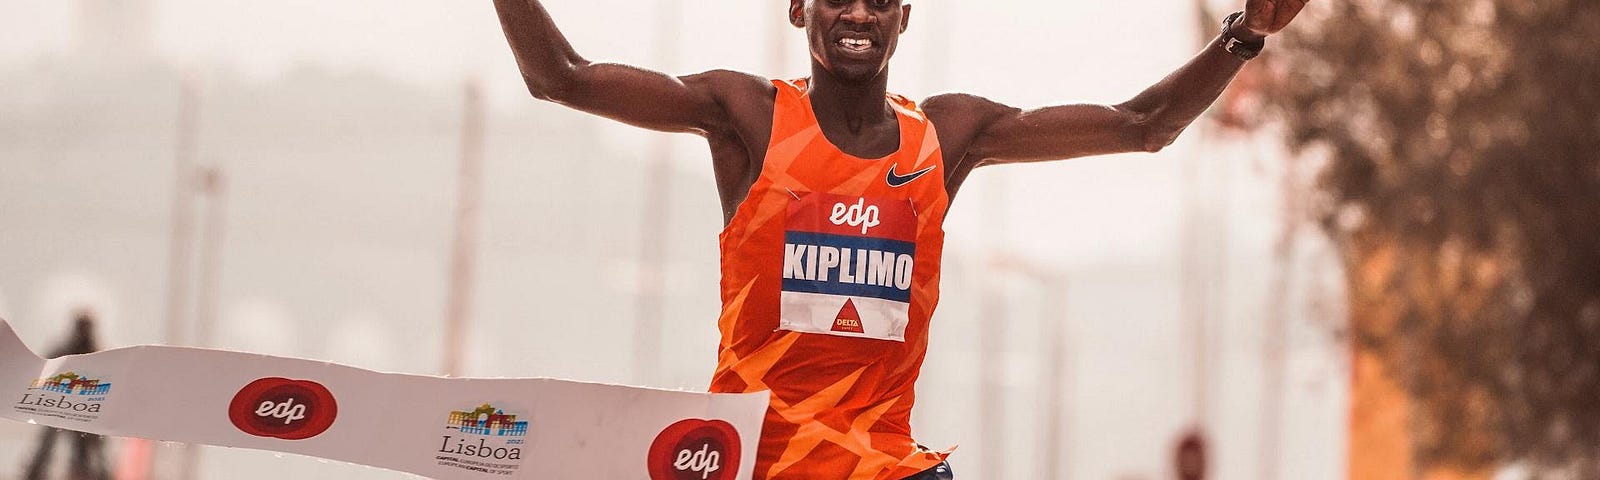 Photo of a runner finishing a race and breaking through the finish-line tape with his arms above his head and smiling proudly.